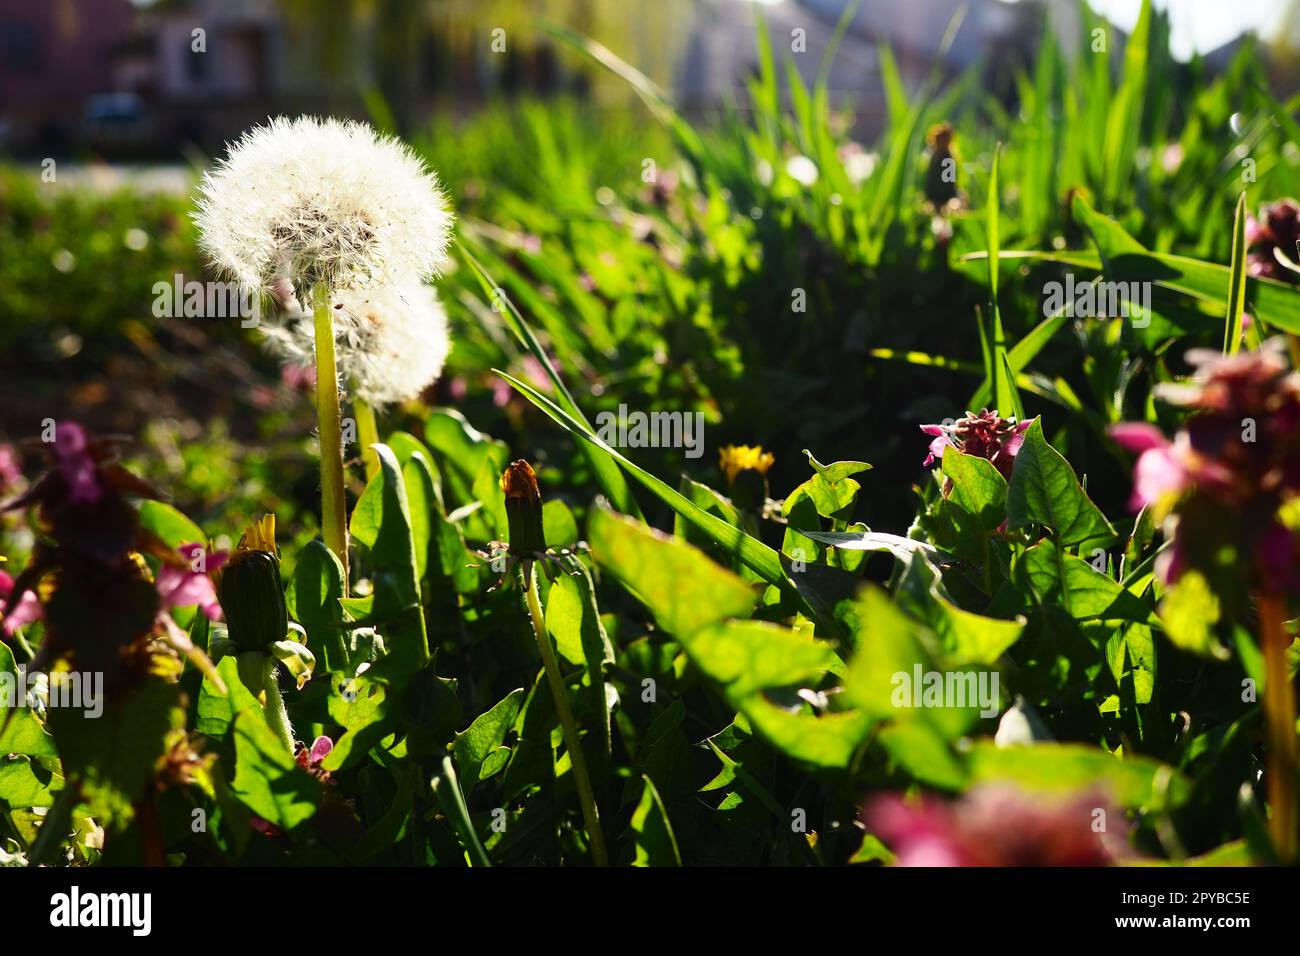 The dandelion Taraxacum is a genus of perennial herbaceous plants in the family Asteraceae. Type species of the genus - Dandelion officinalis. White volatile dandelion seeds in a meadow Stock Photo